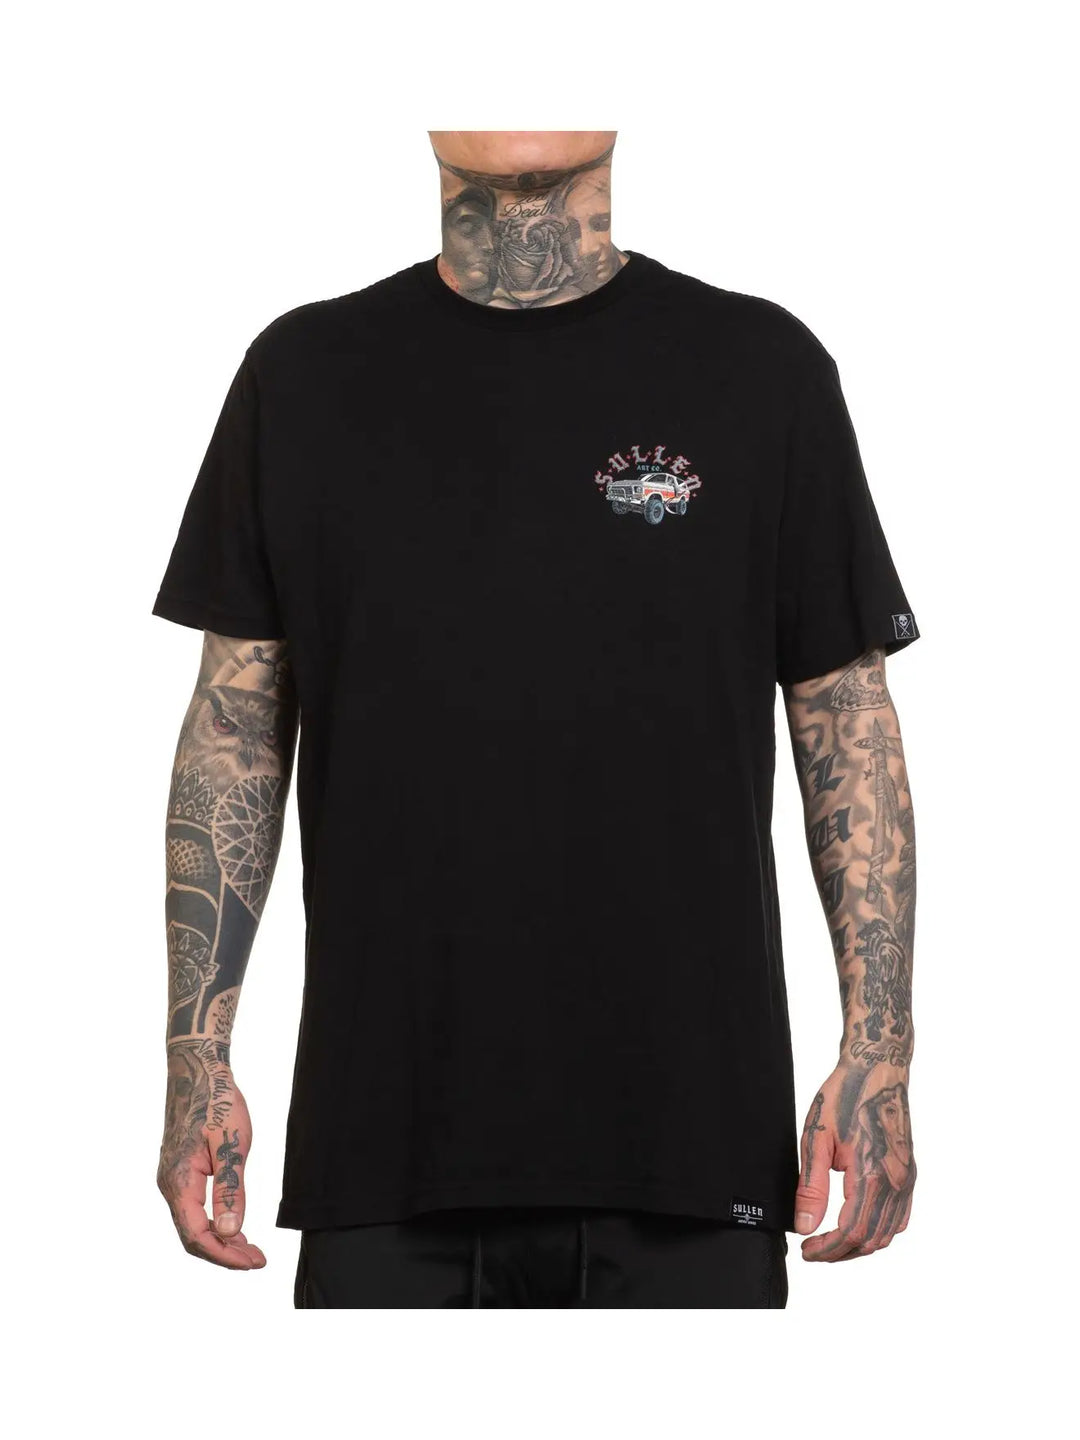 End of the Road Premium Tee